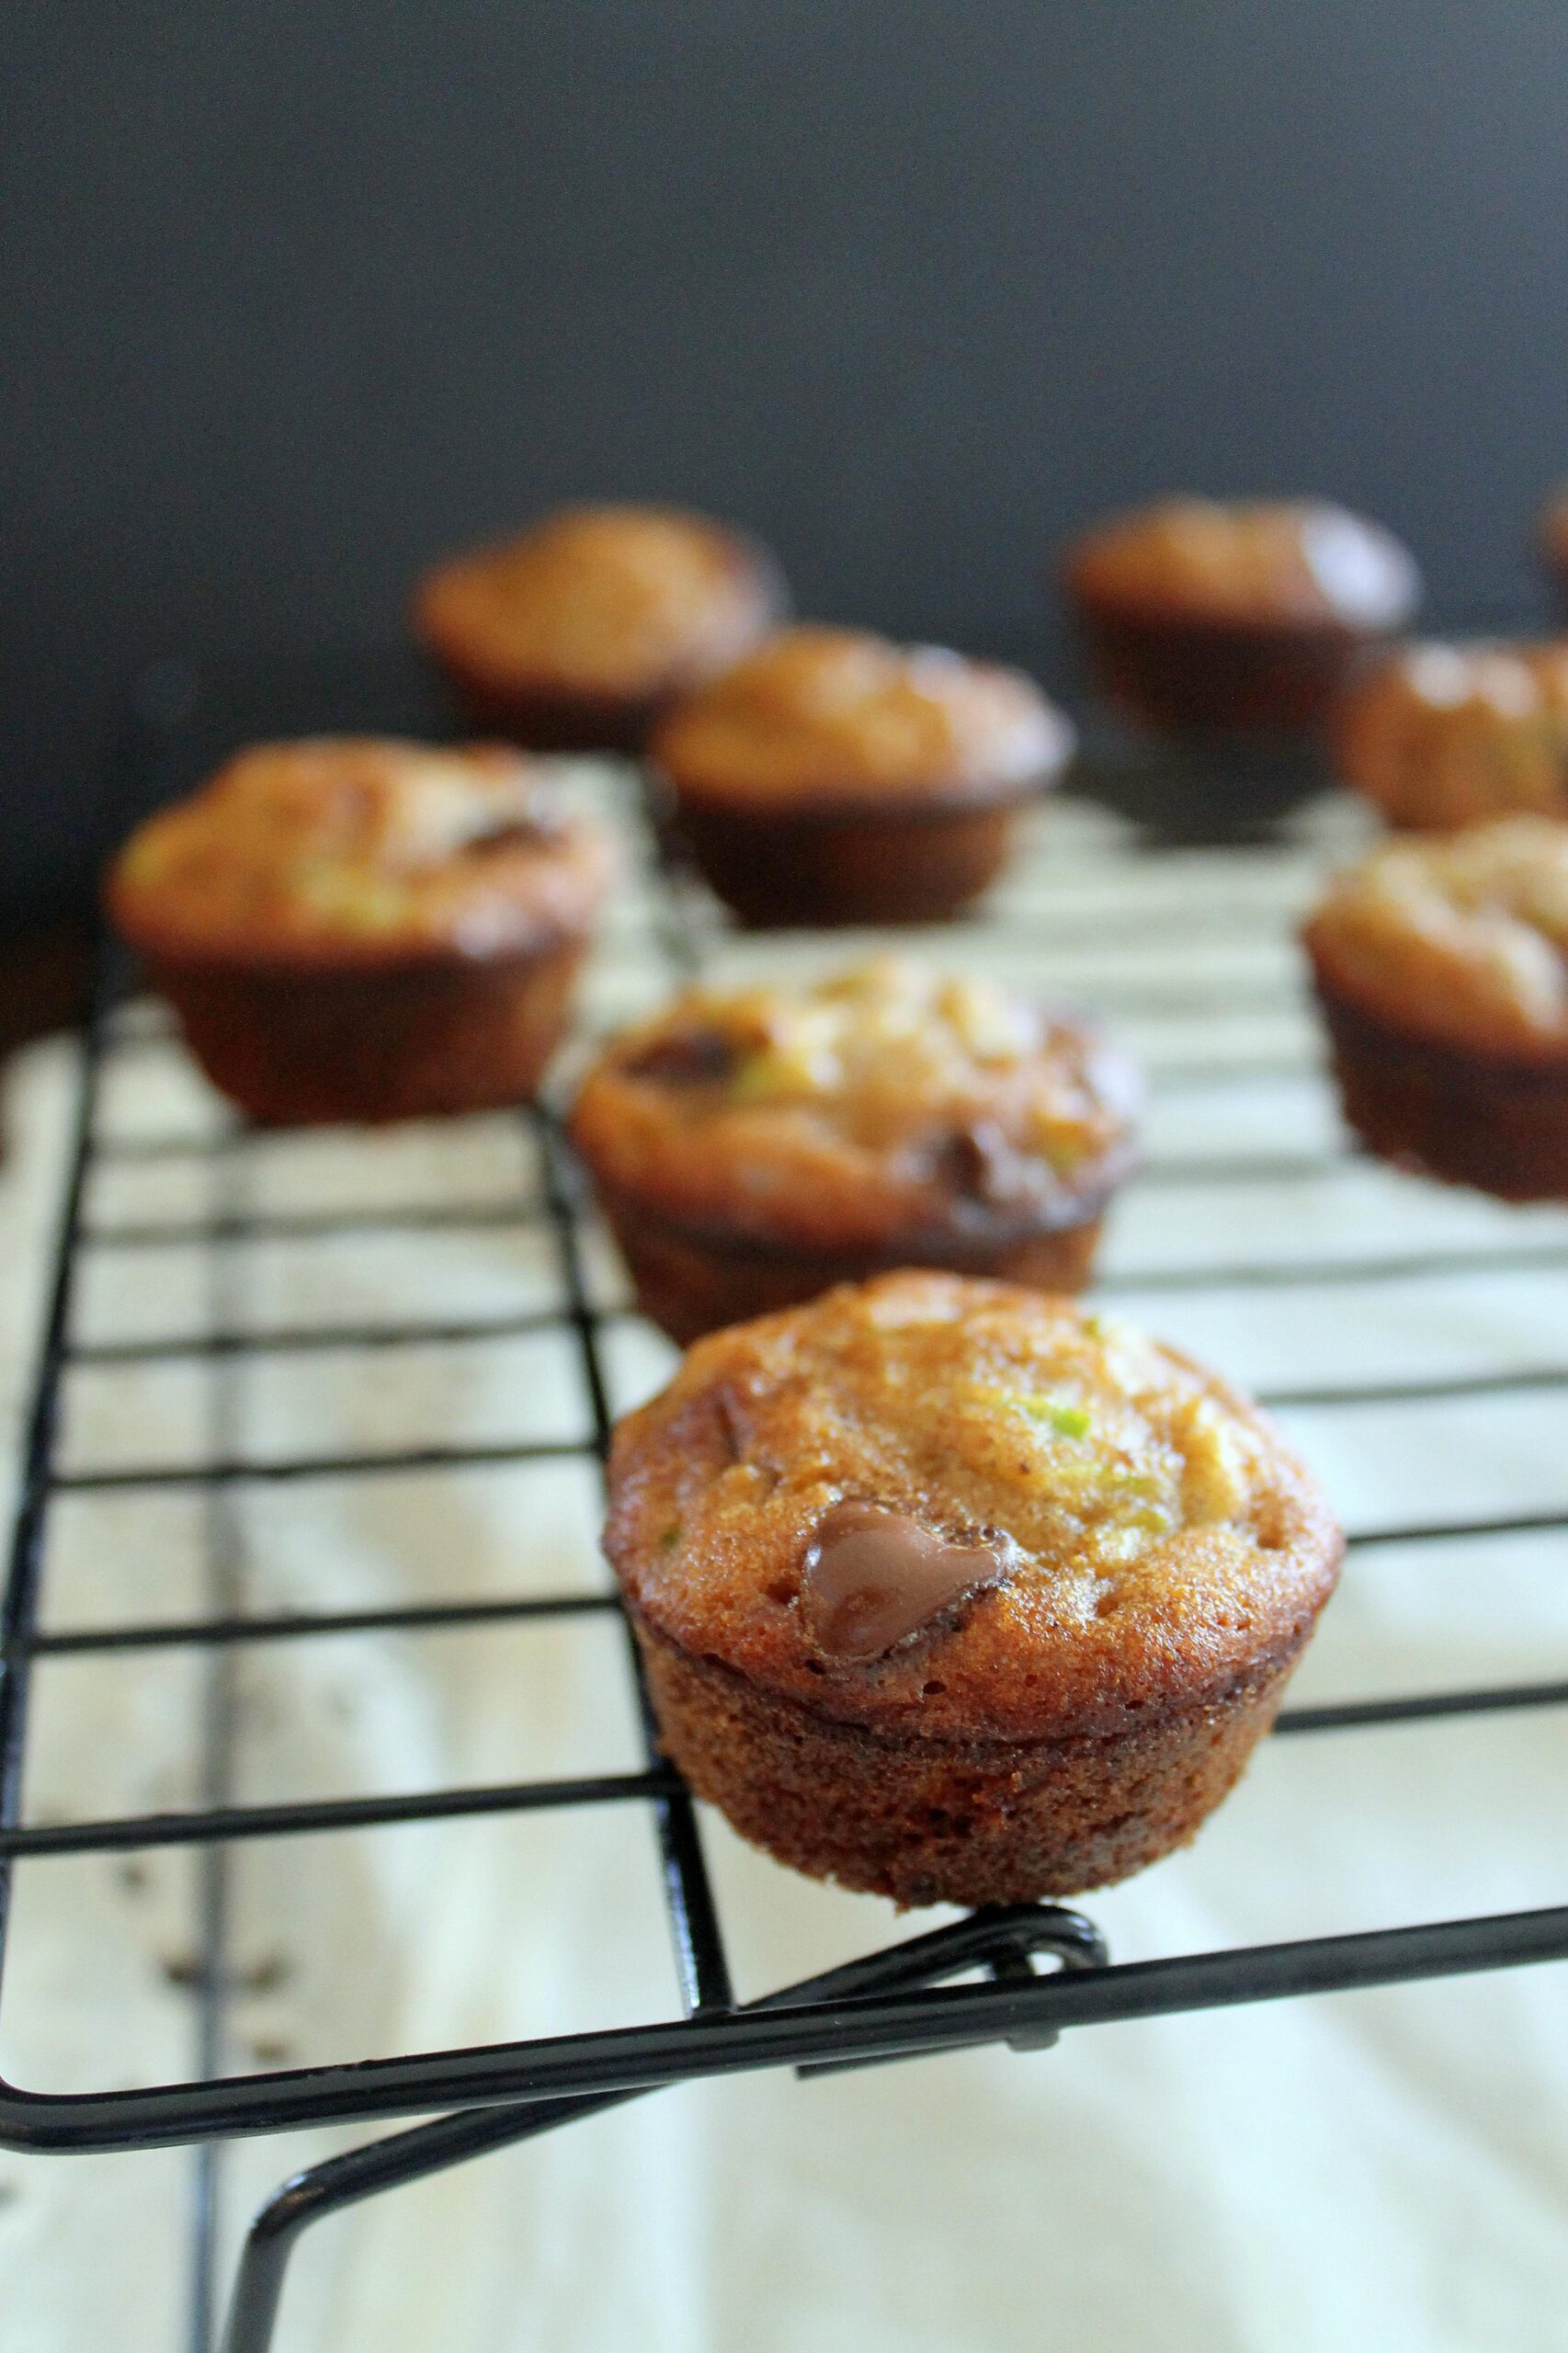  Baking with zucchini is a great way to add moisture to your baked goods without